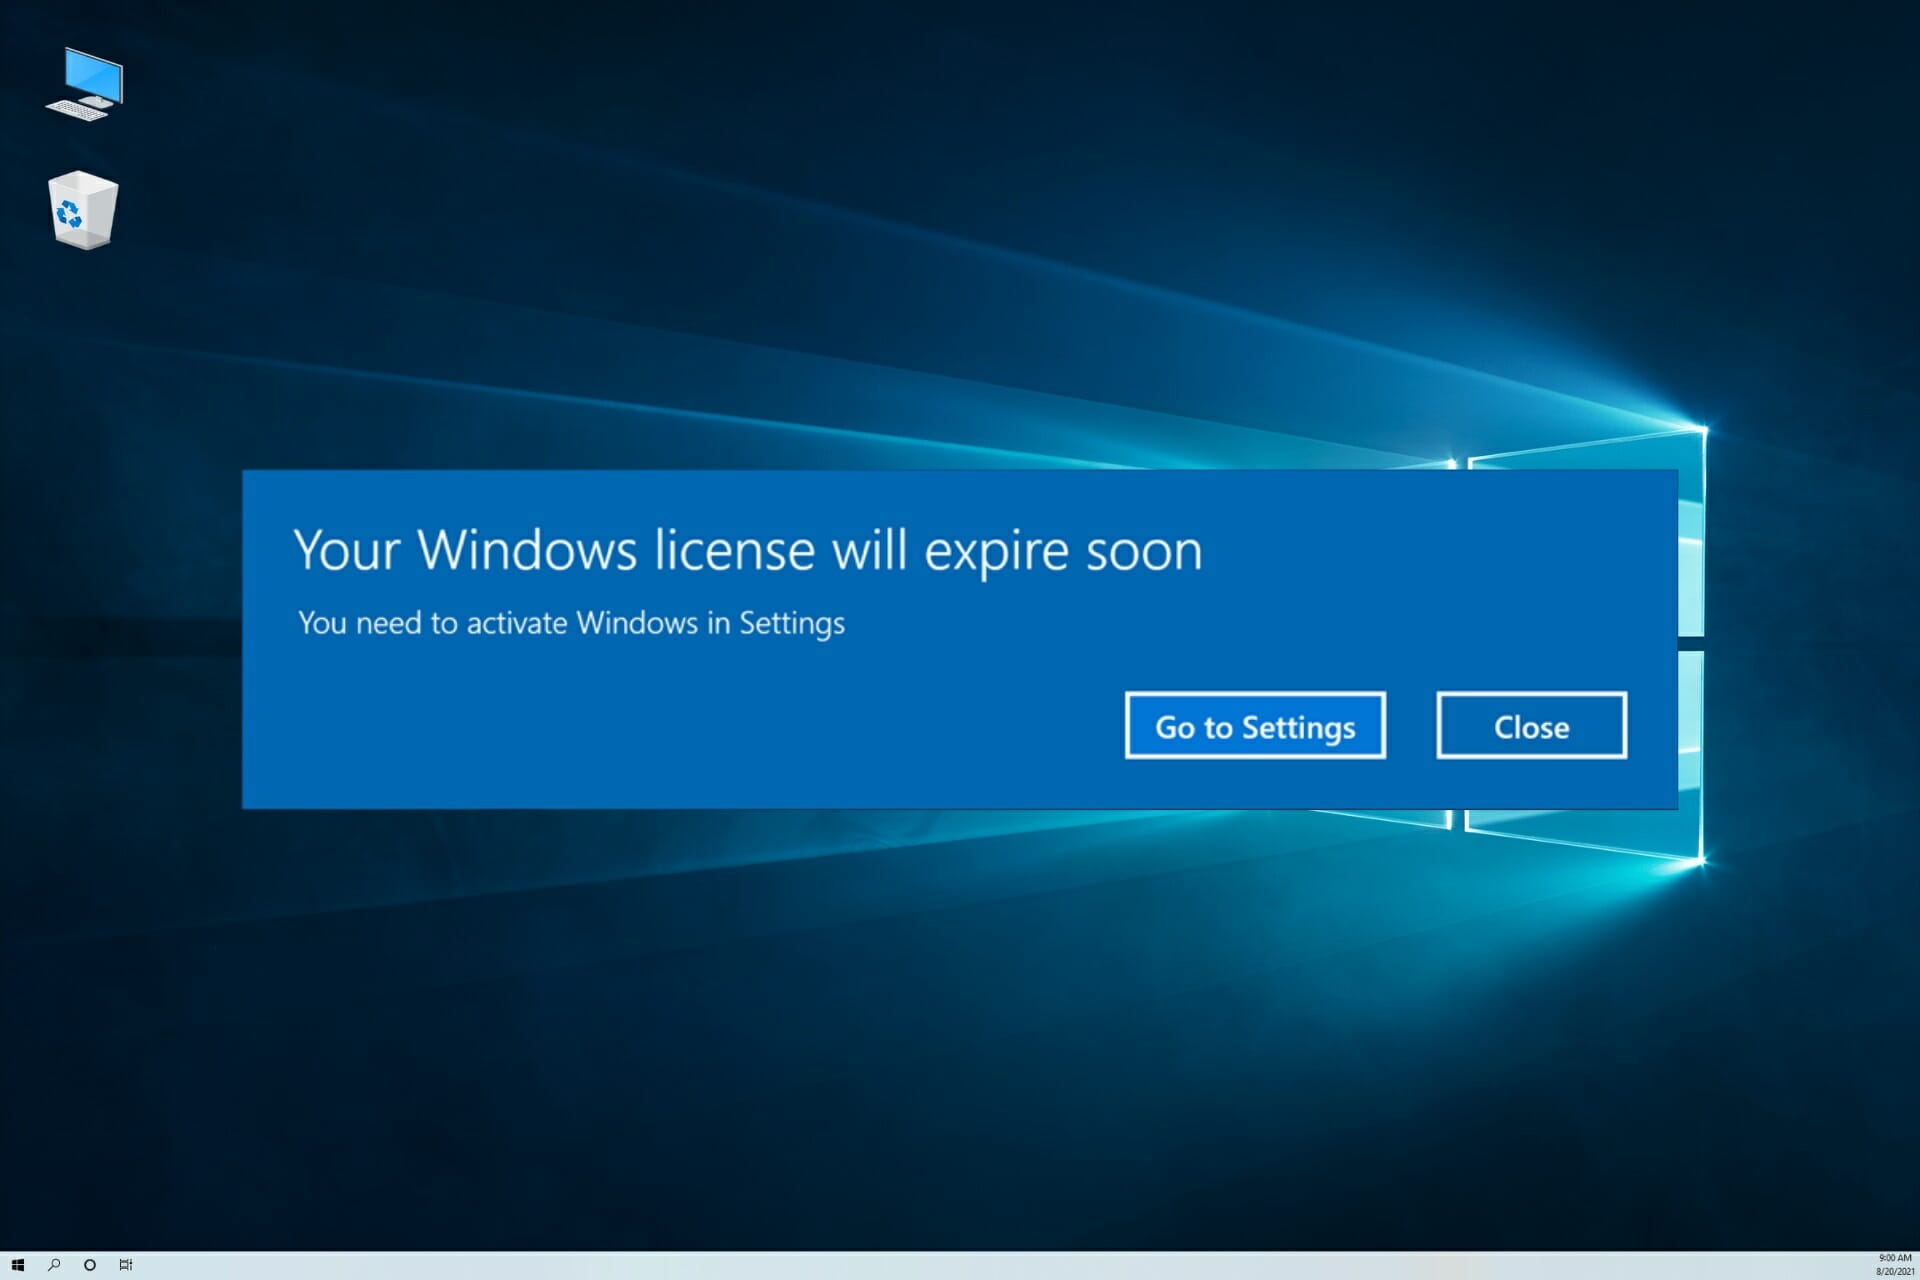 How to fix Your Windows license will expire soon